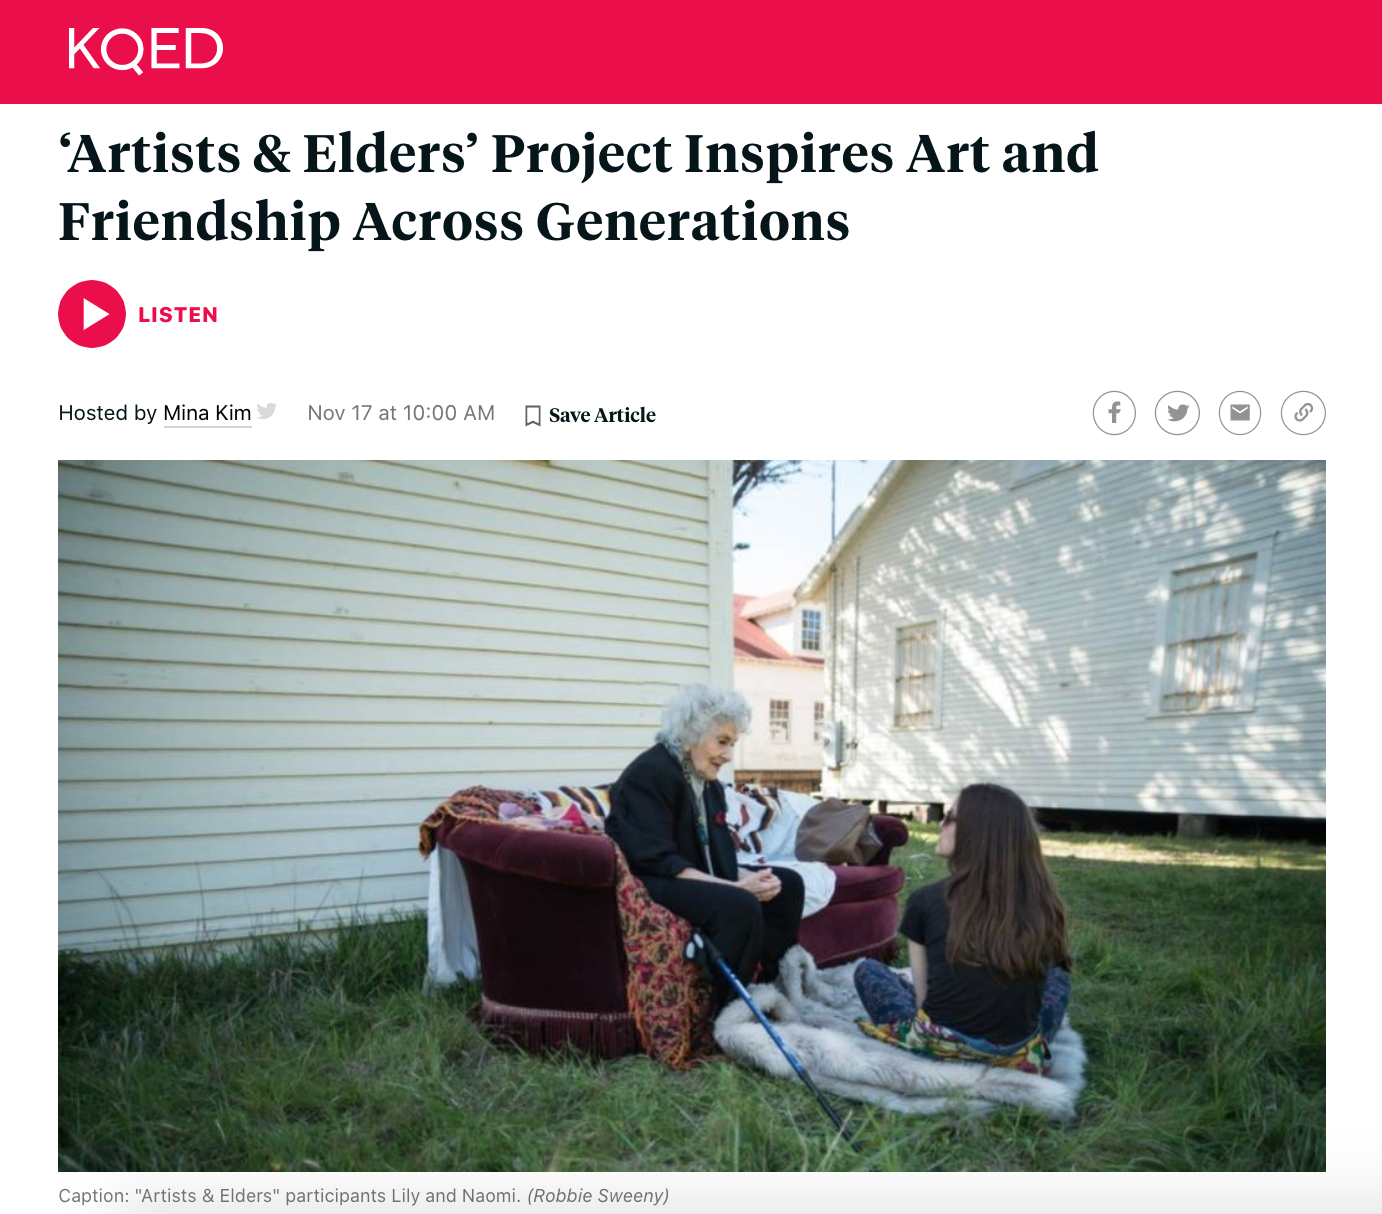 Screenshot of the KQED's interview with Erika Chong Shuch and Artists and Elders participants